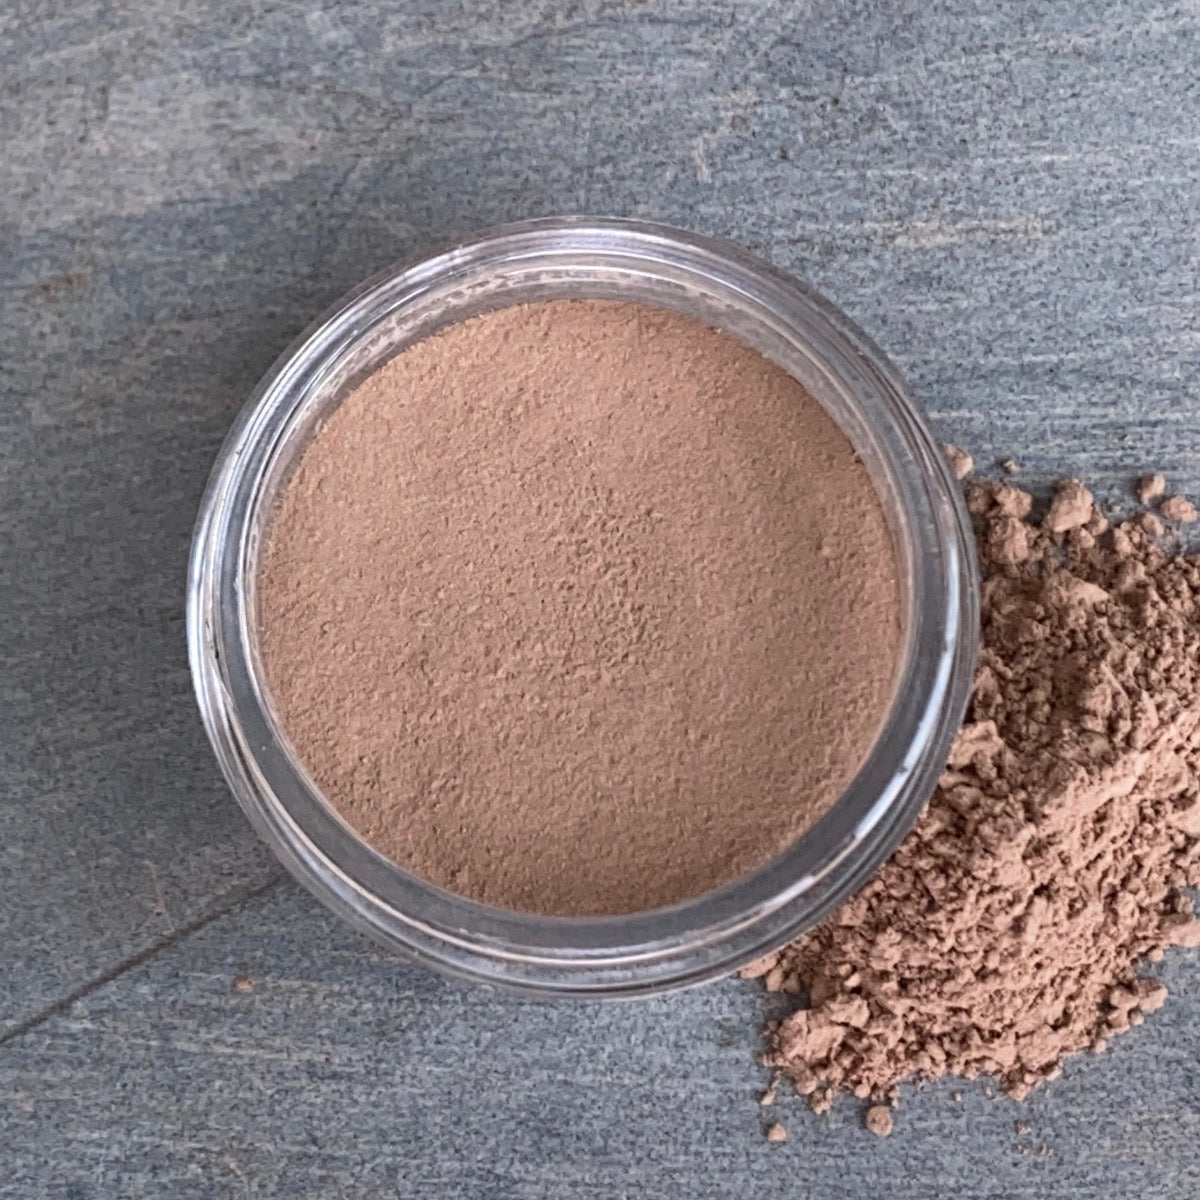 Amplitude Powder Bronzer: a cosmetic jar with a delicate cocoa-hued powder displayed beside the jar, showcasing its consistency for a naturally radiant glow